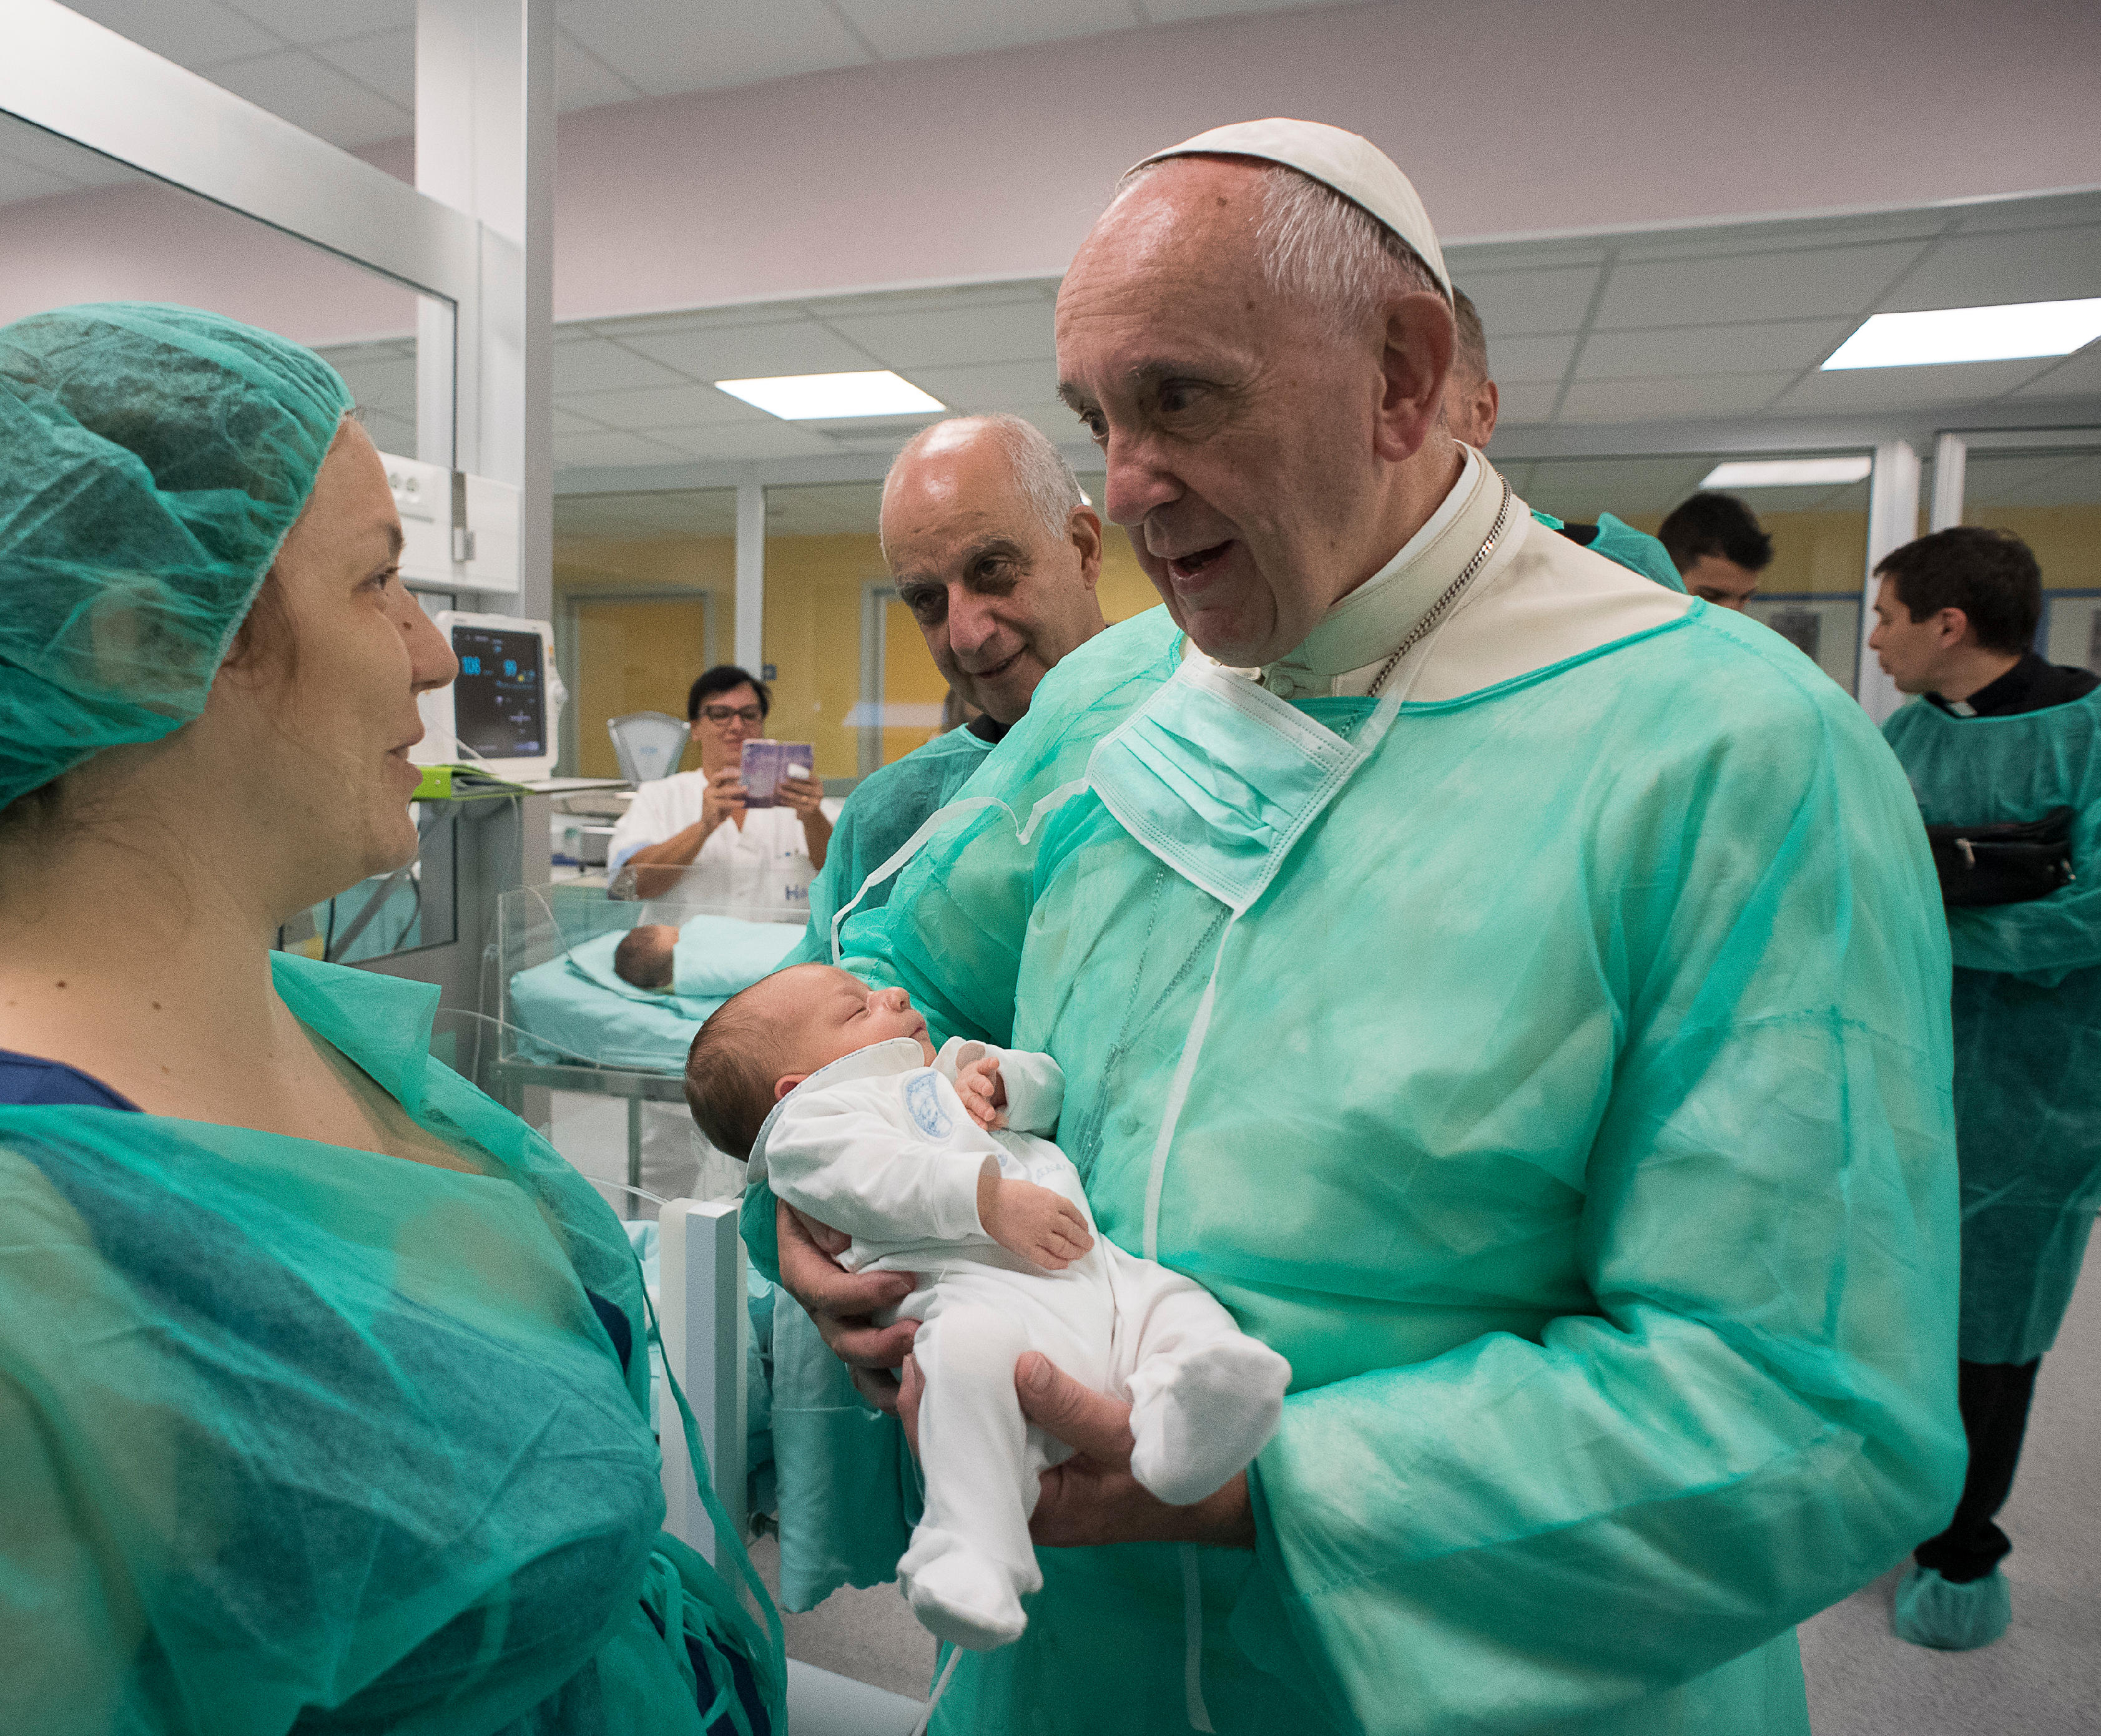 Pope Francis holds a baby as he visits the neonatal unit at San Giovanni Hospital in Rome Sept. 16. The visit was part of the pope's series of Friday works of mercy during the Holy Year. (CNS photo/L'Osservatore Romano, handout)